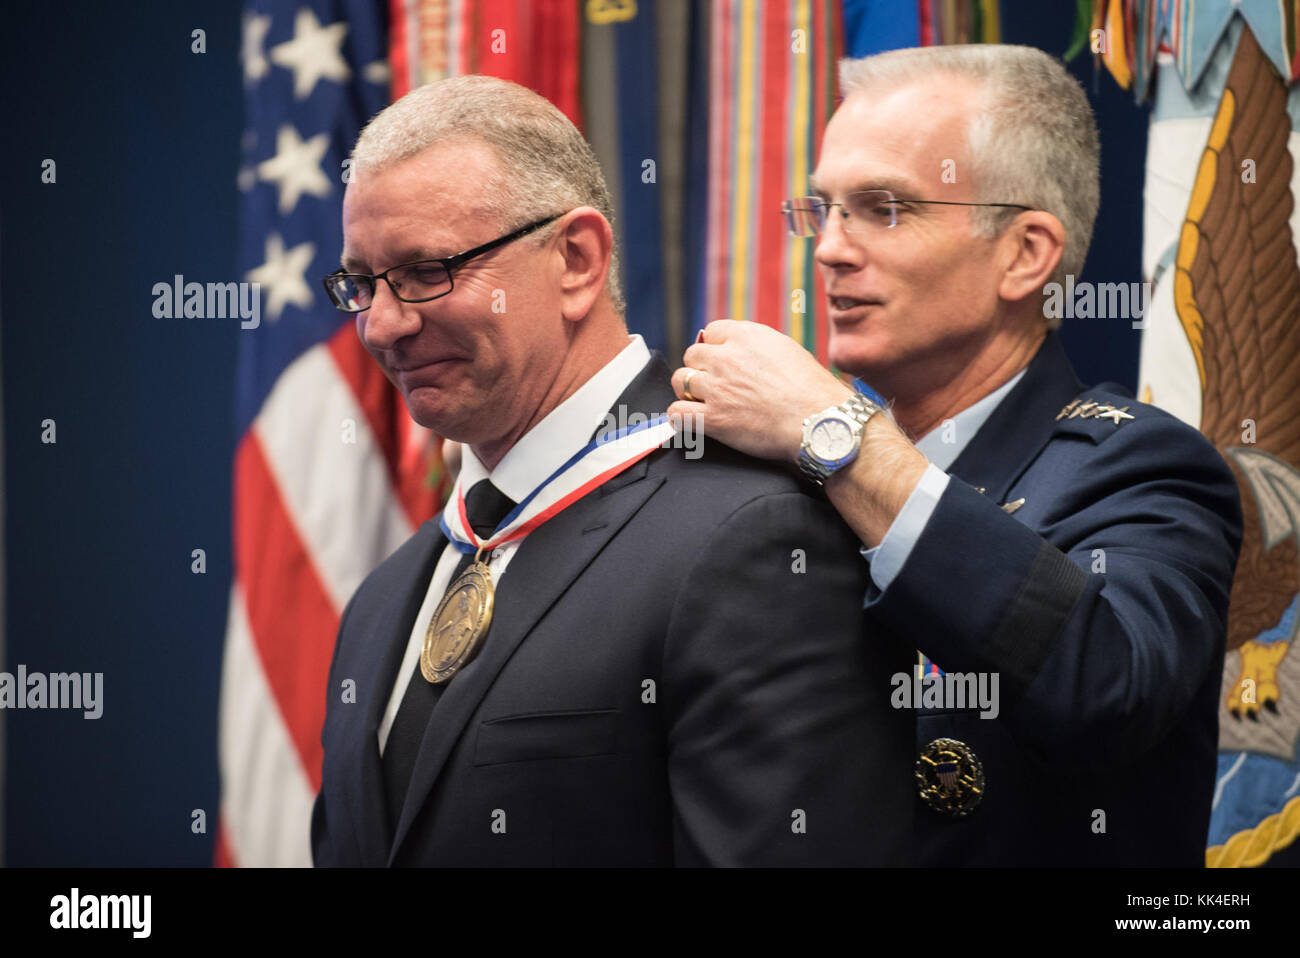 U.S. Air Force Gen. Paul J. Selva, Vice Chairman of the Joint Chiefs of Staff, places the award on Chef Robert Irvine, the Office of the Secretary of Defense Awardee, during the 2017 Spirit of Hope Awards at the Hall of Heroes in the Pentagon, Oct. 26, 2017. The Spirit of Hope Award is awarded to men and women of the U.S. Armed Forces, entertainers, and other distinguished Americans and organizations whose patriotism and service reflect that of Mr. Bob Hope. The recipients selflessly contributed an extraordinary amount of time, talent, or resources to significantly enhance the quality of life  Stock Photo